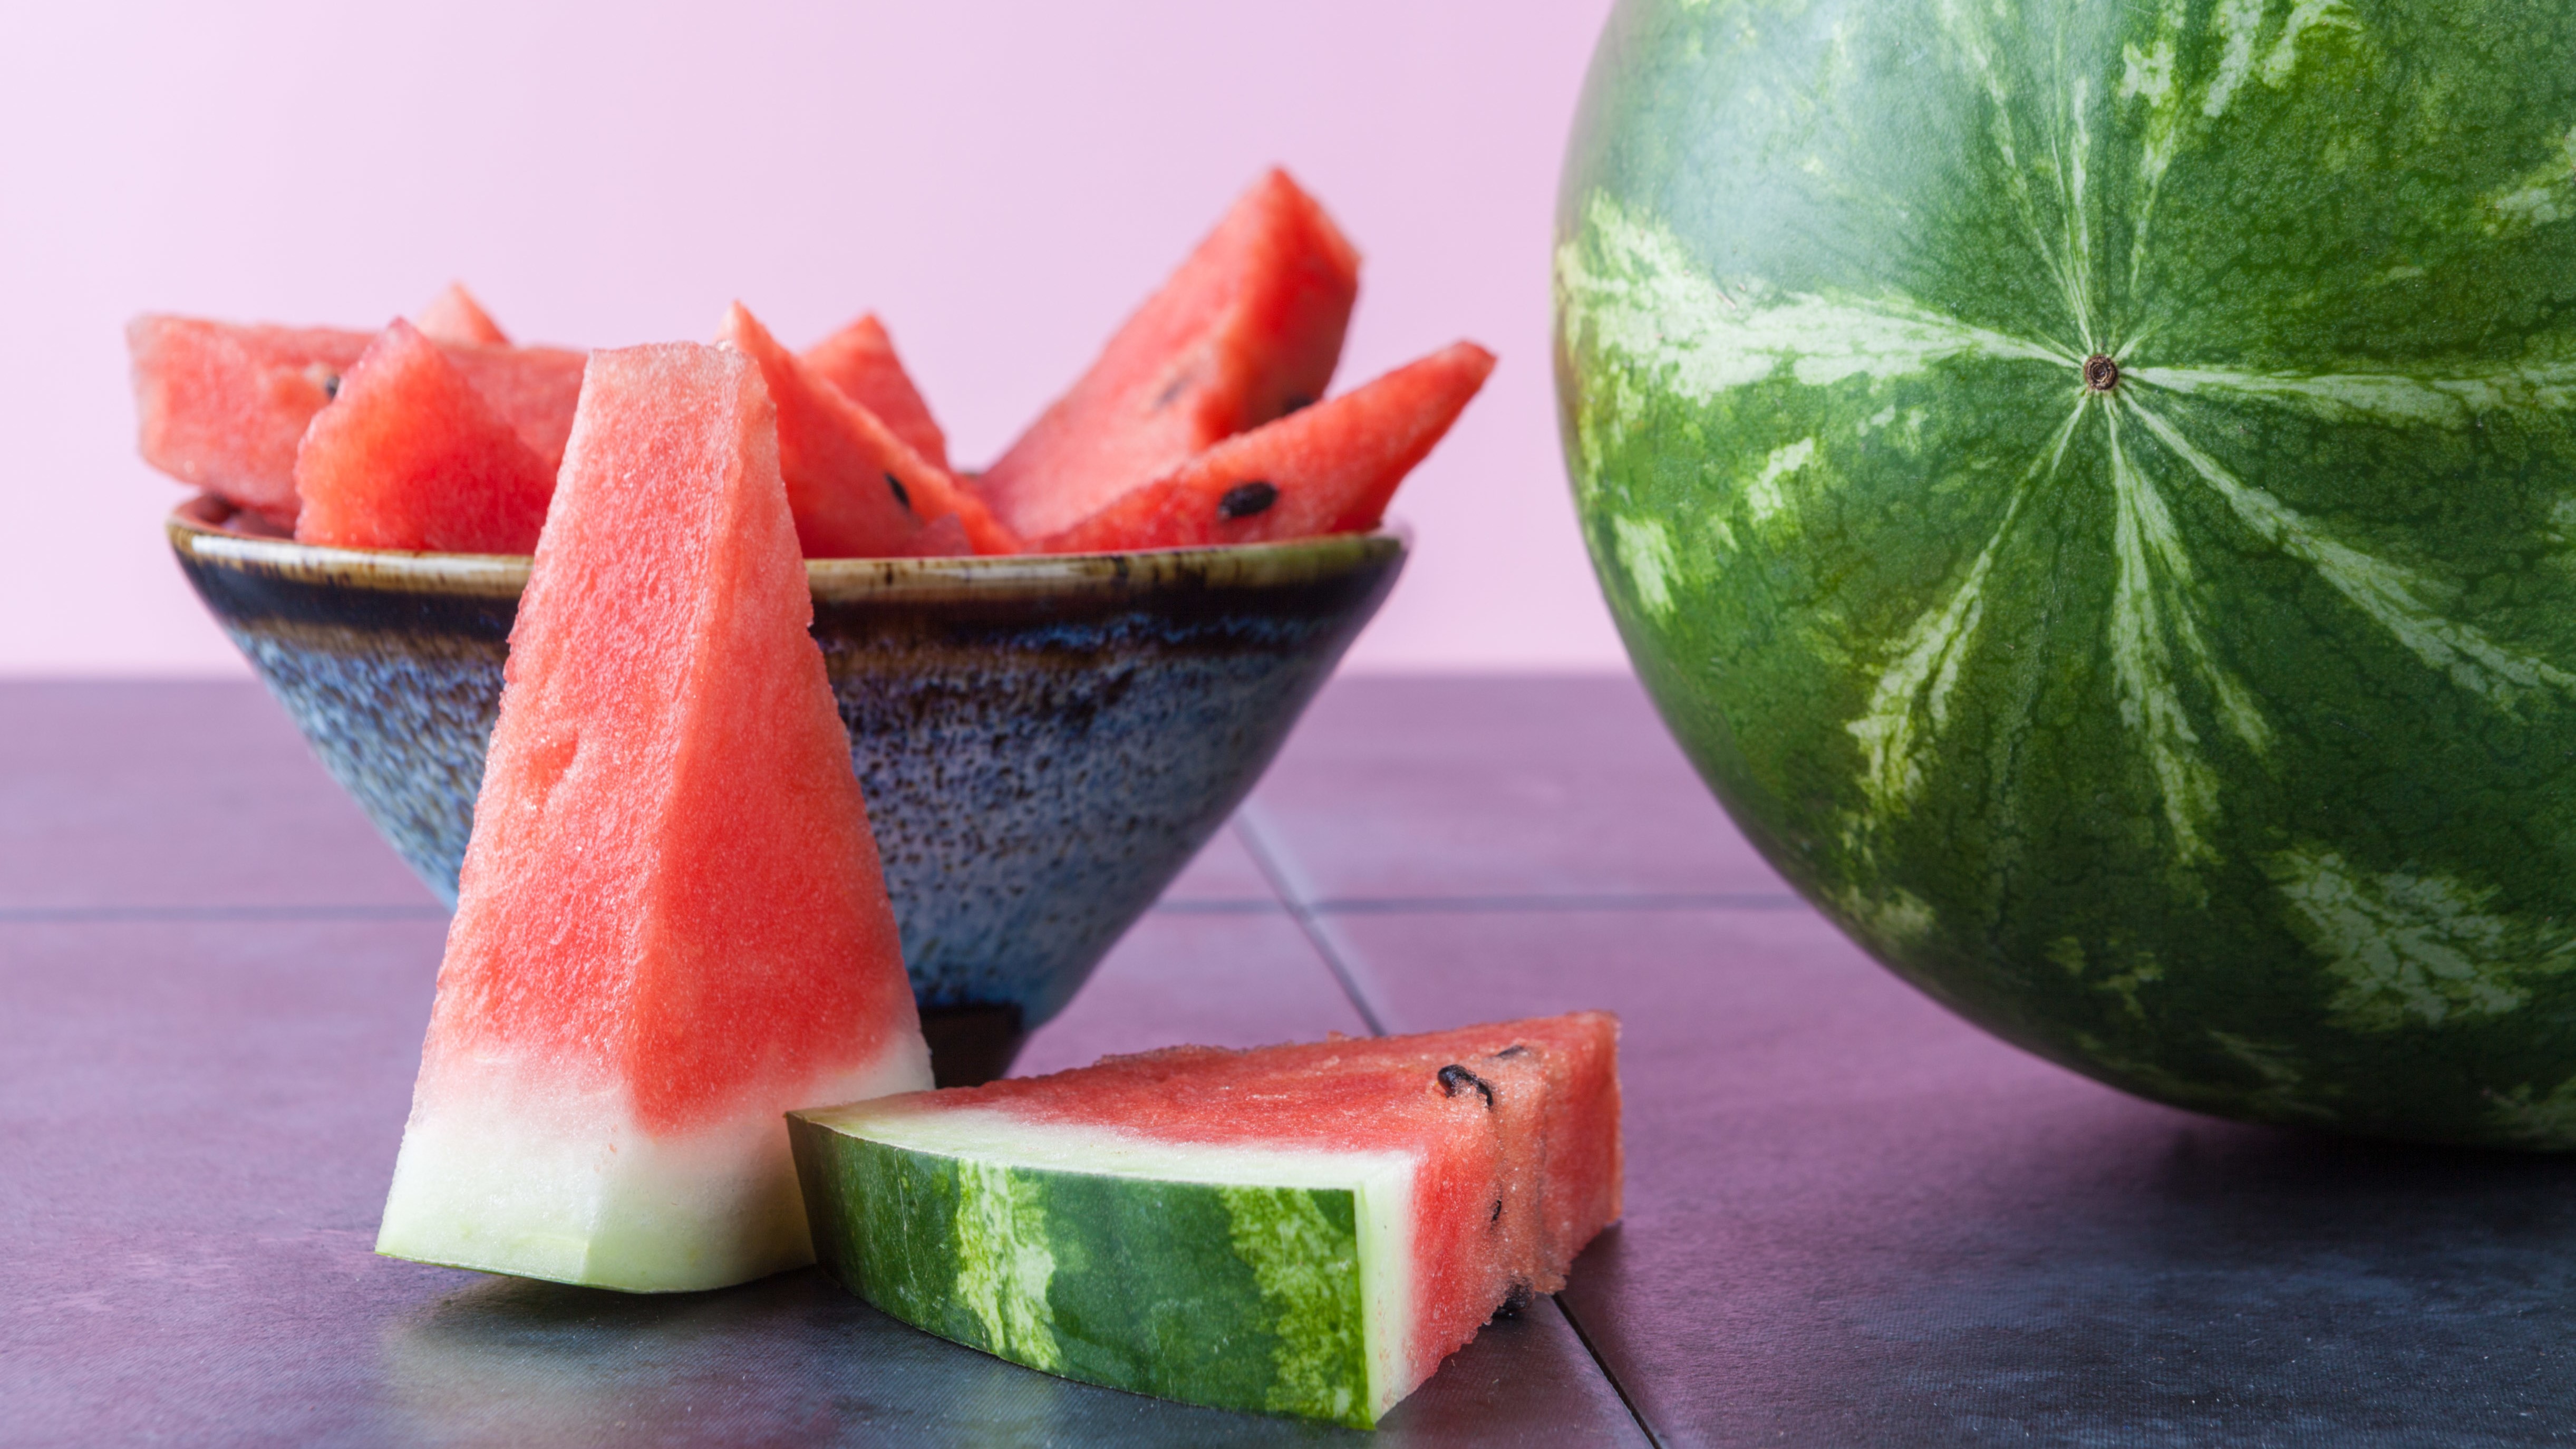 Whole watermelon and slices in ceramic bowl with copy space. Shallow depth of field.